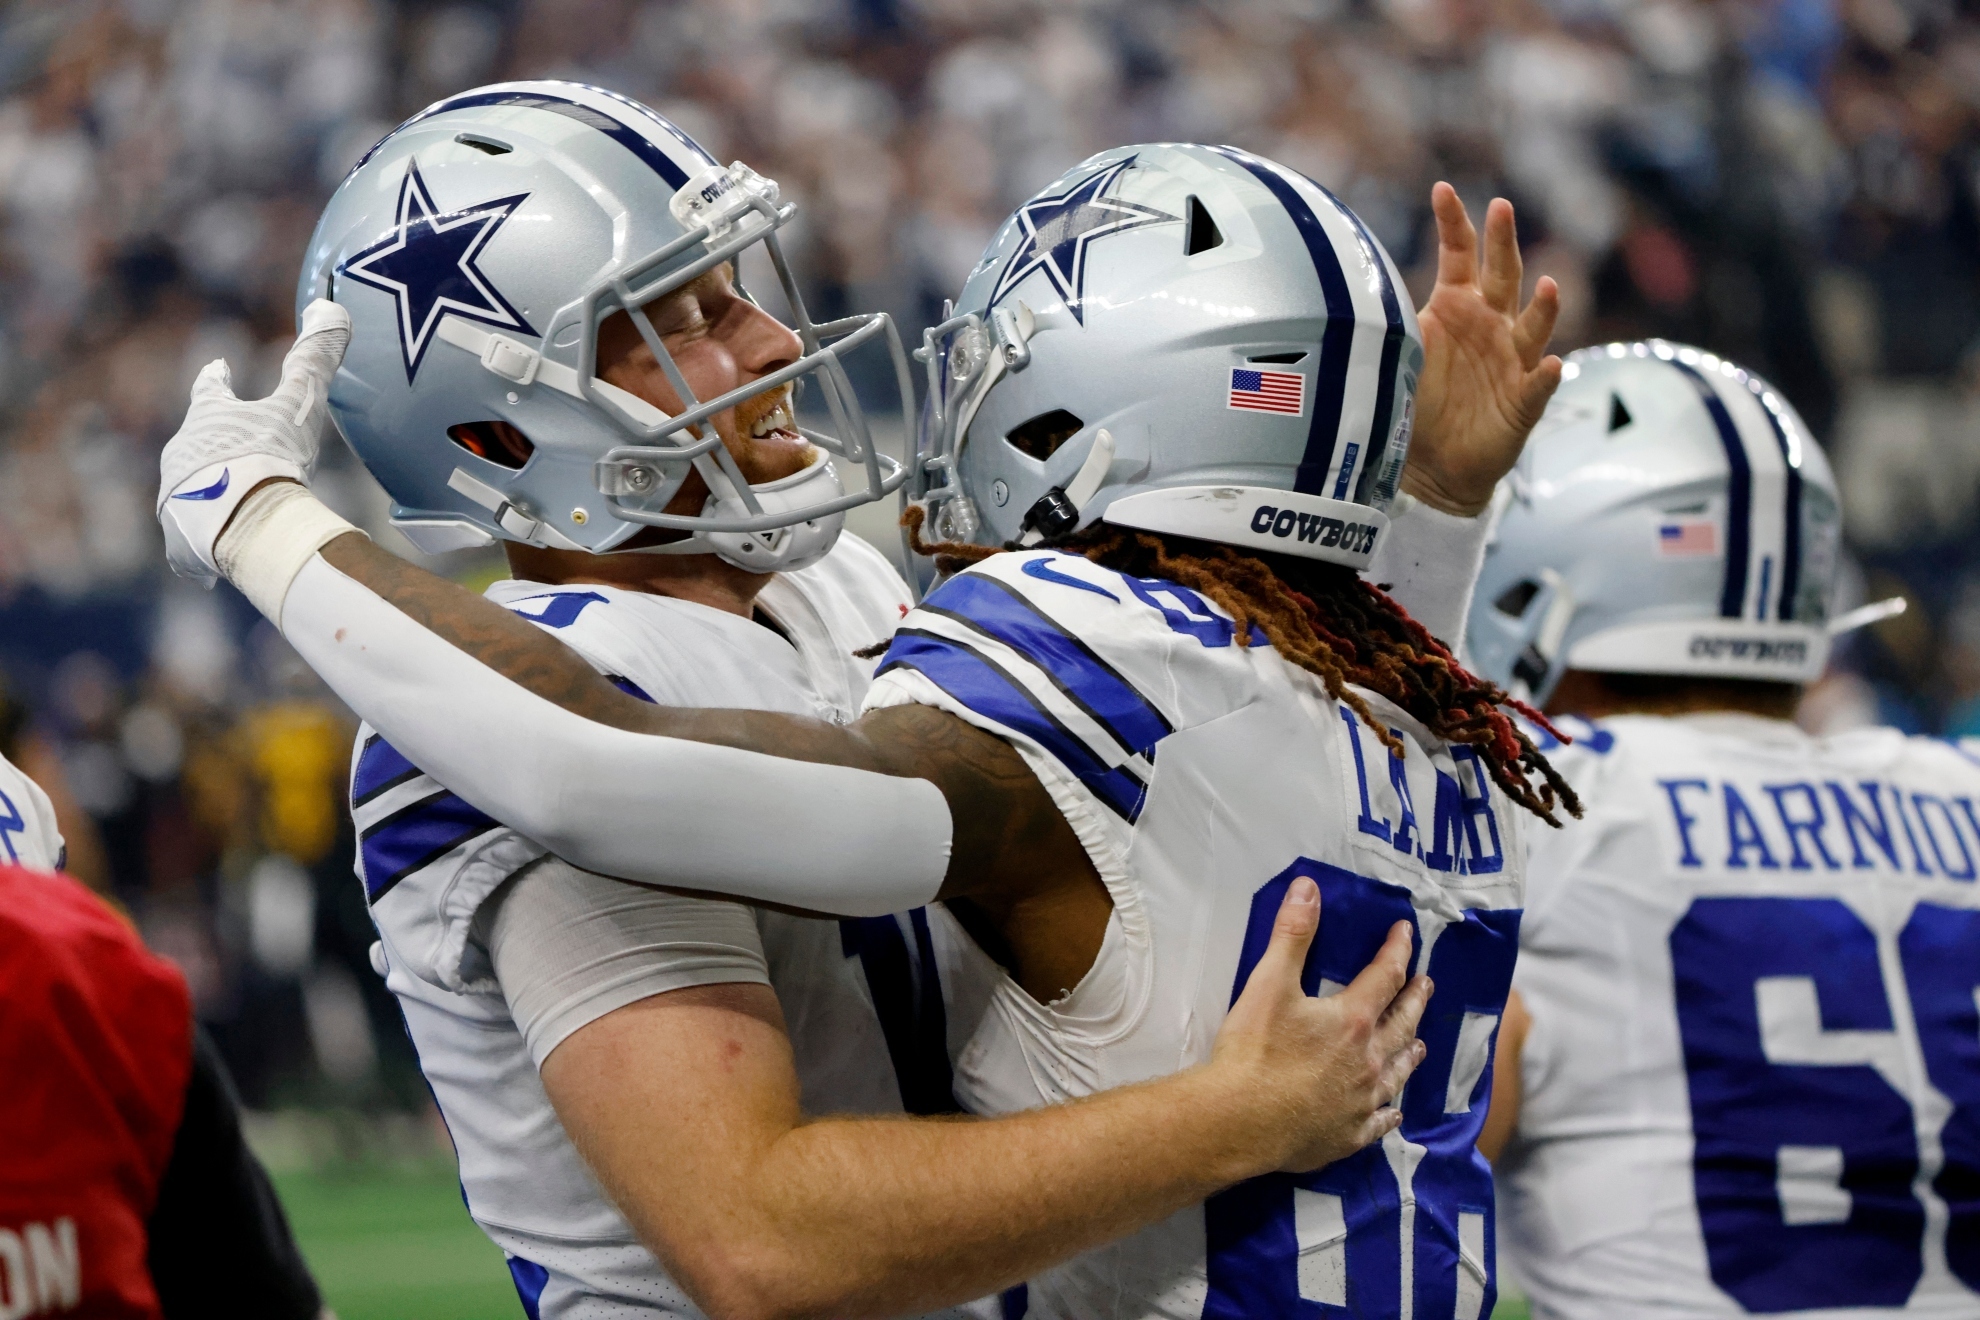 Dallas Cowboys quarterback Cooper Rush, left, and wide receiver CeeDee Lamb (88) celebrate after Rush threw a touchdown pass to Lamb in the second half of a NFL footbal l game against the Washington Commanders (AP Photo/Ron Jenkins)